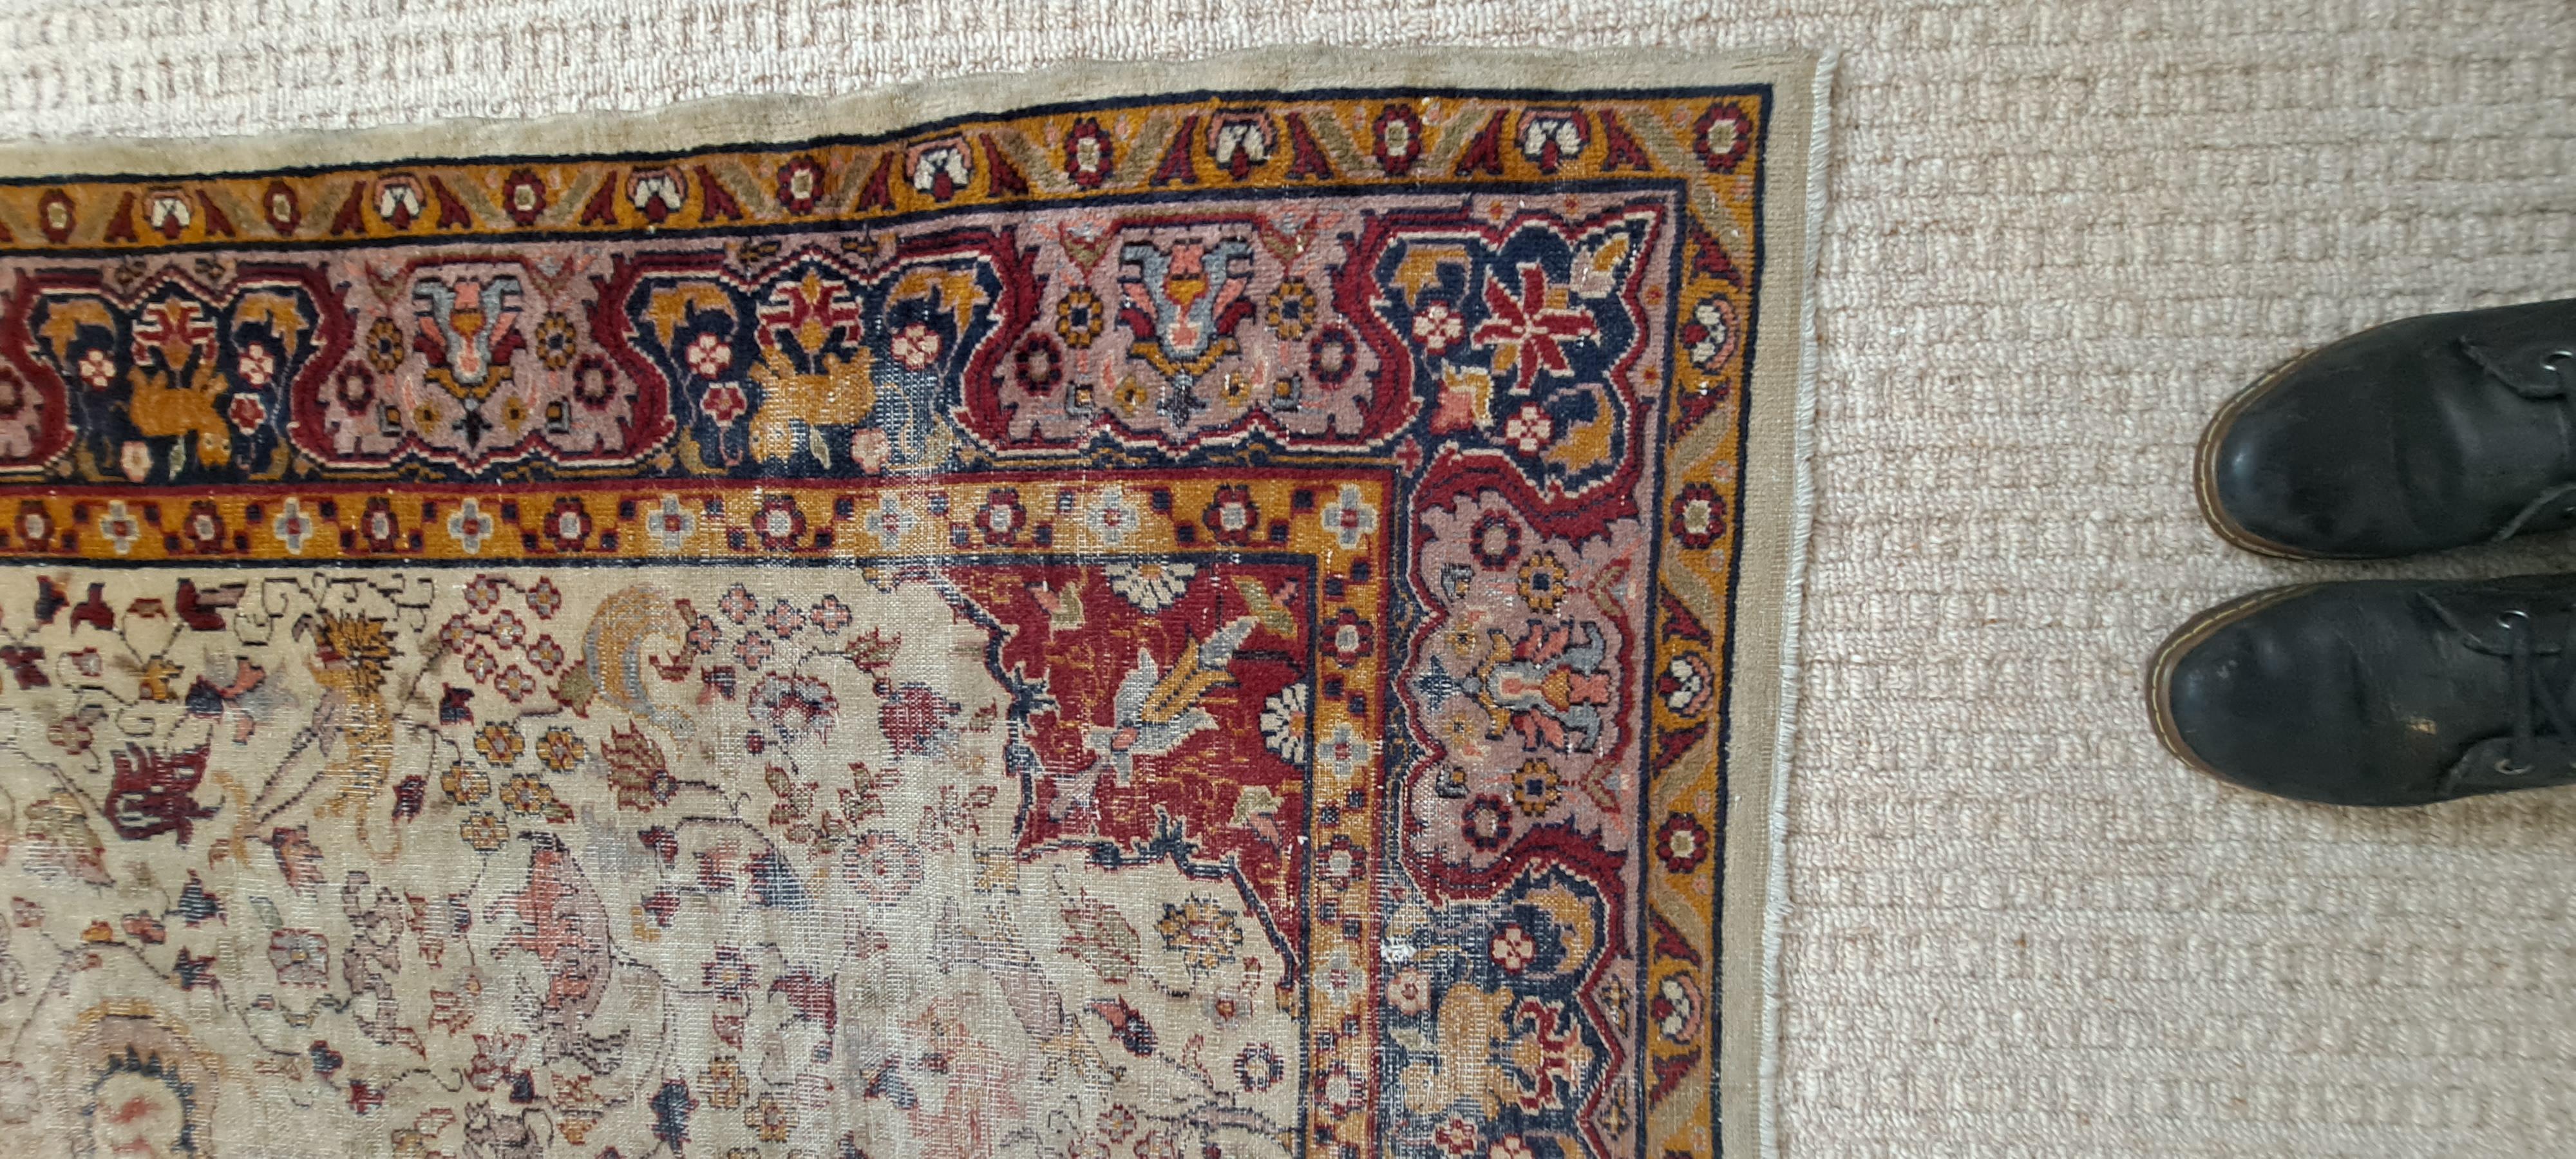 Antique Kashan Handwoven Silk Rug   In Fair Condition For Sale In San Francisco, CA